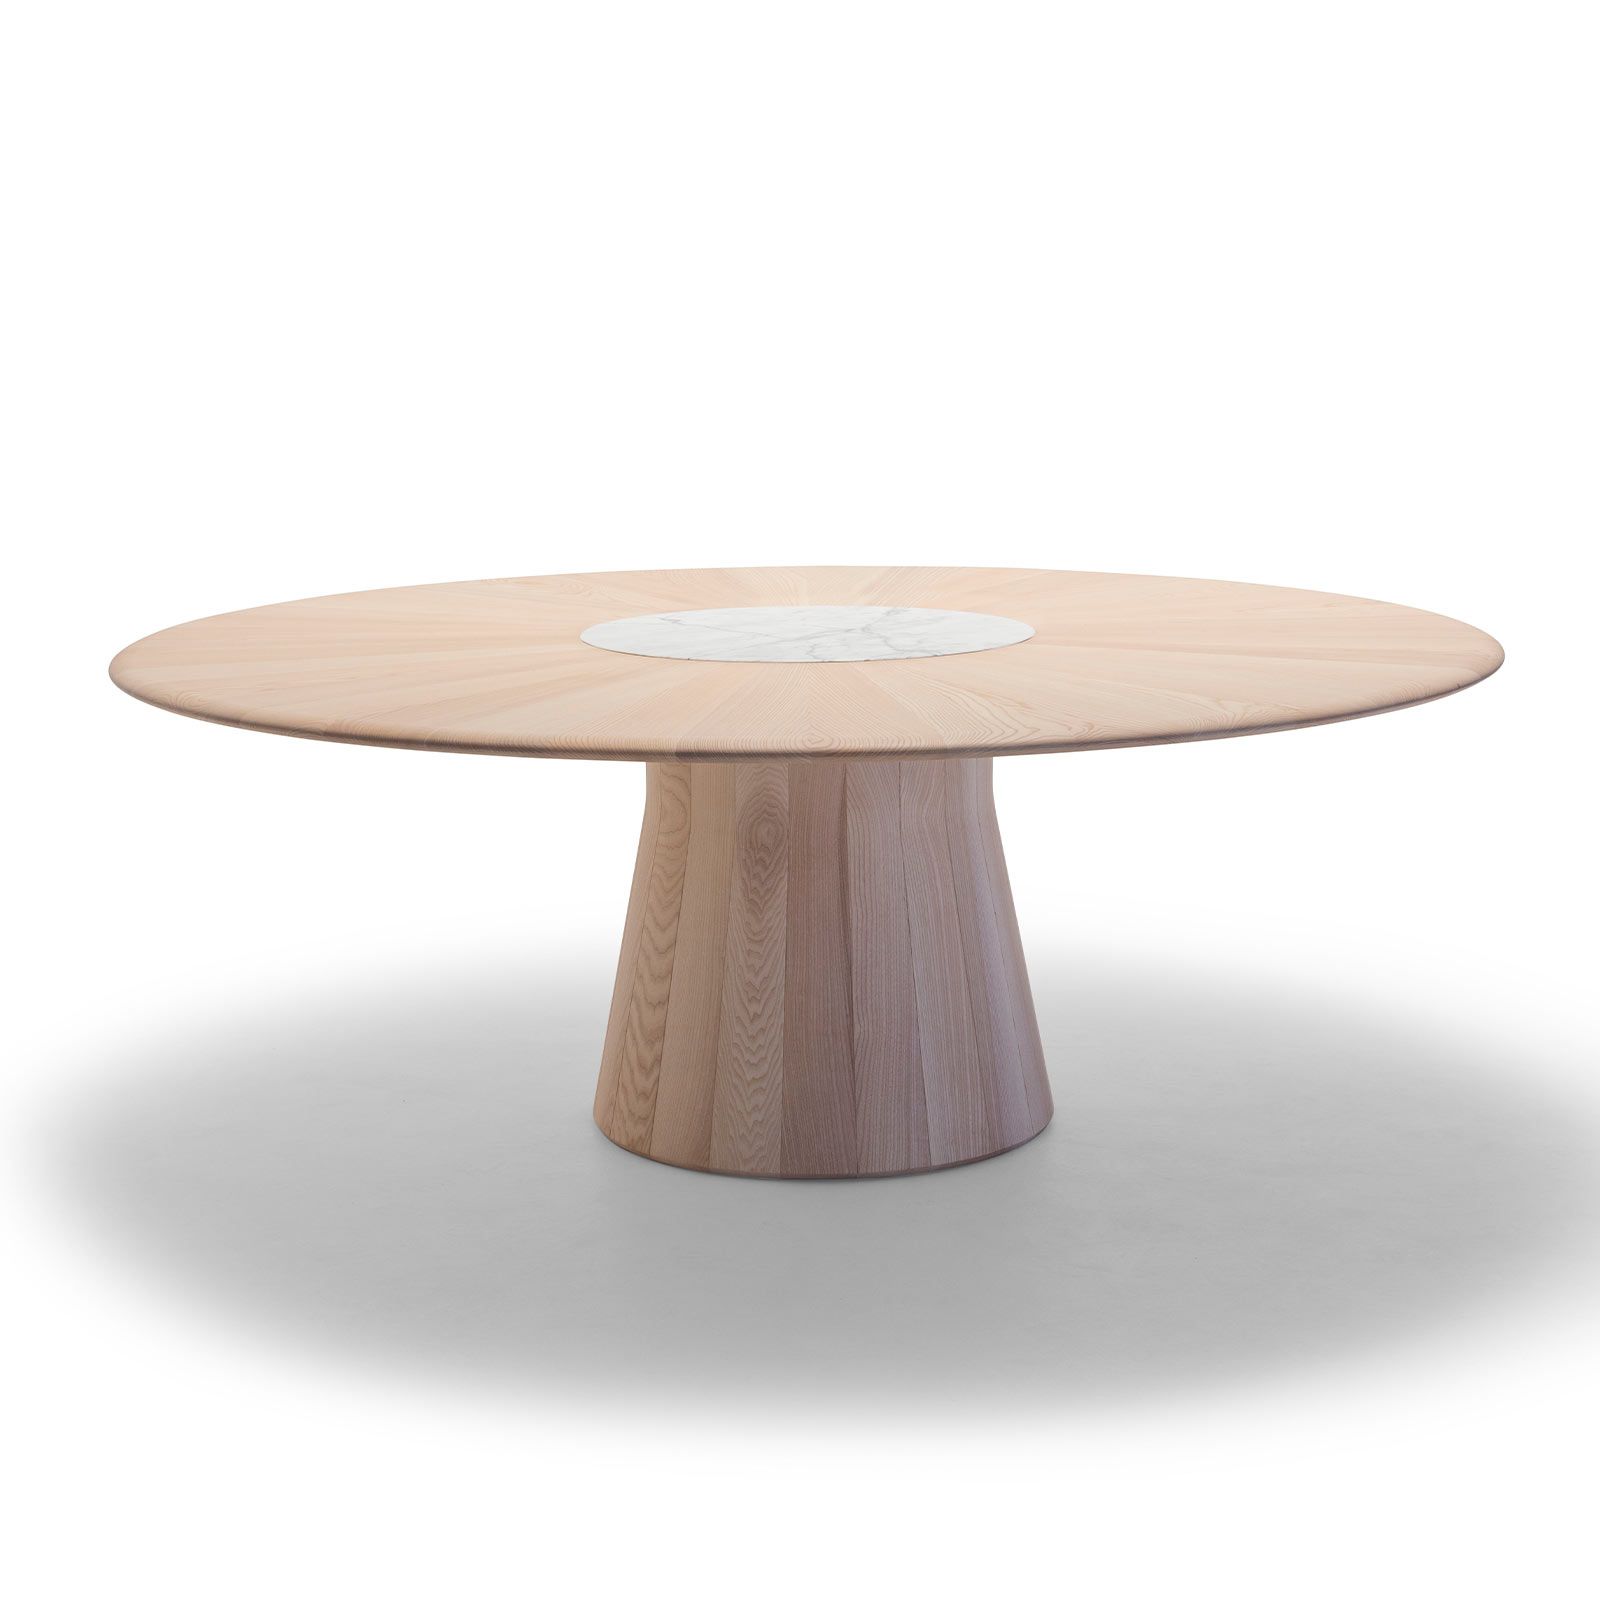 REVERSE WOOD TABLE